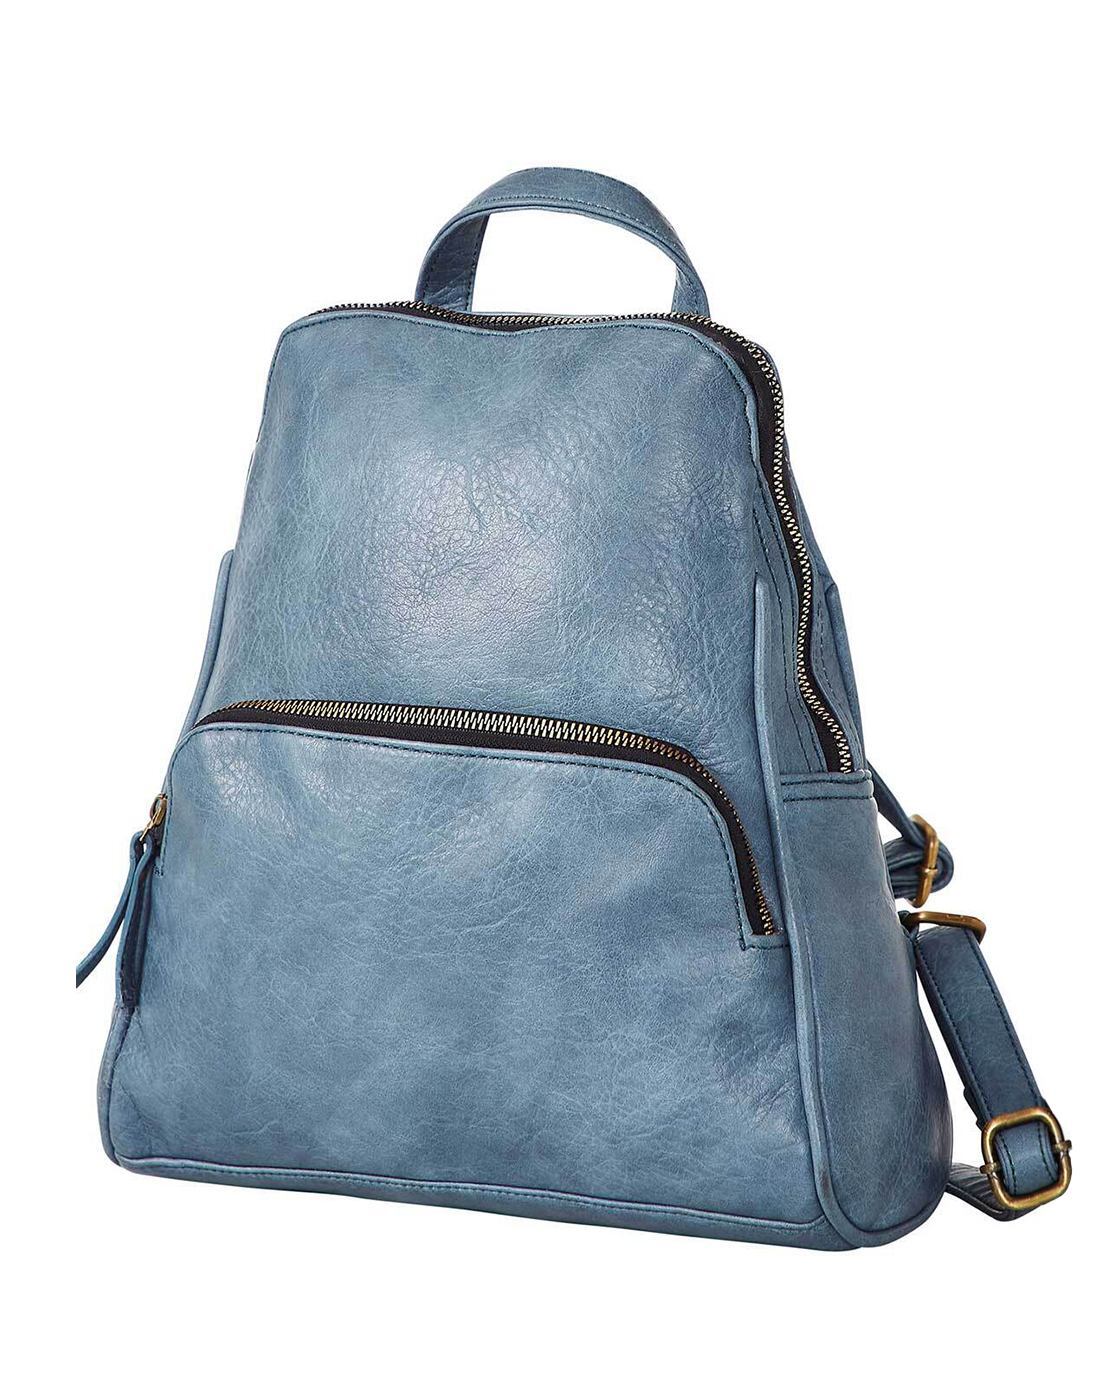 Women Backpack Purse Fashion Leather Designer Ladies Convertible Travel  College Shoulder Bags with Colorful Strap,blue,blue，G25126 - Walmart.com